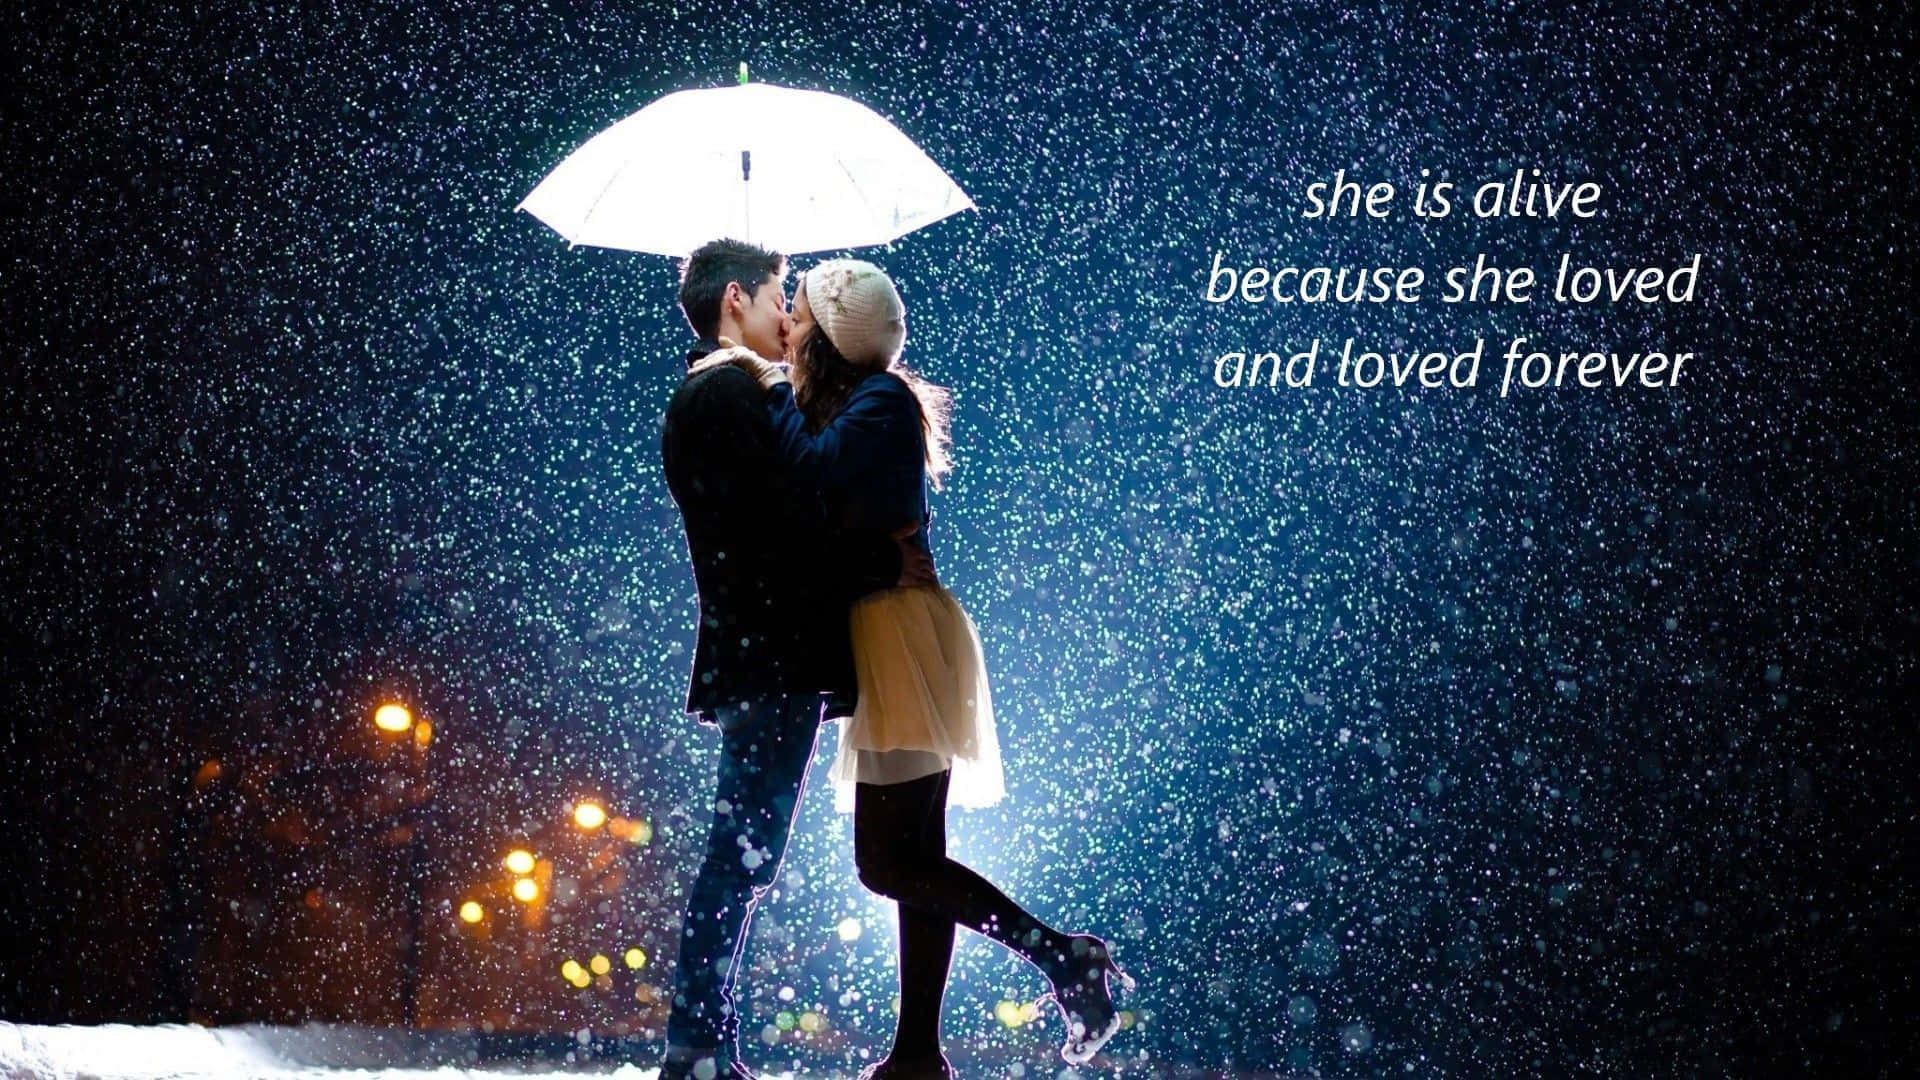 Cute HD Love and Romance Pictures Of Couples In Rain  EntertainmentMesh   Couple in rain Umbrella photography Rain photography